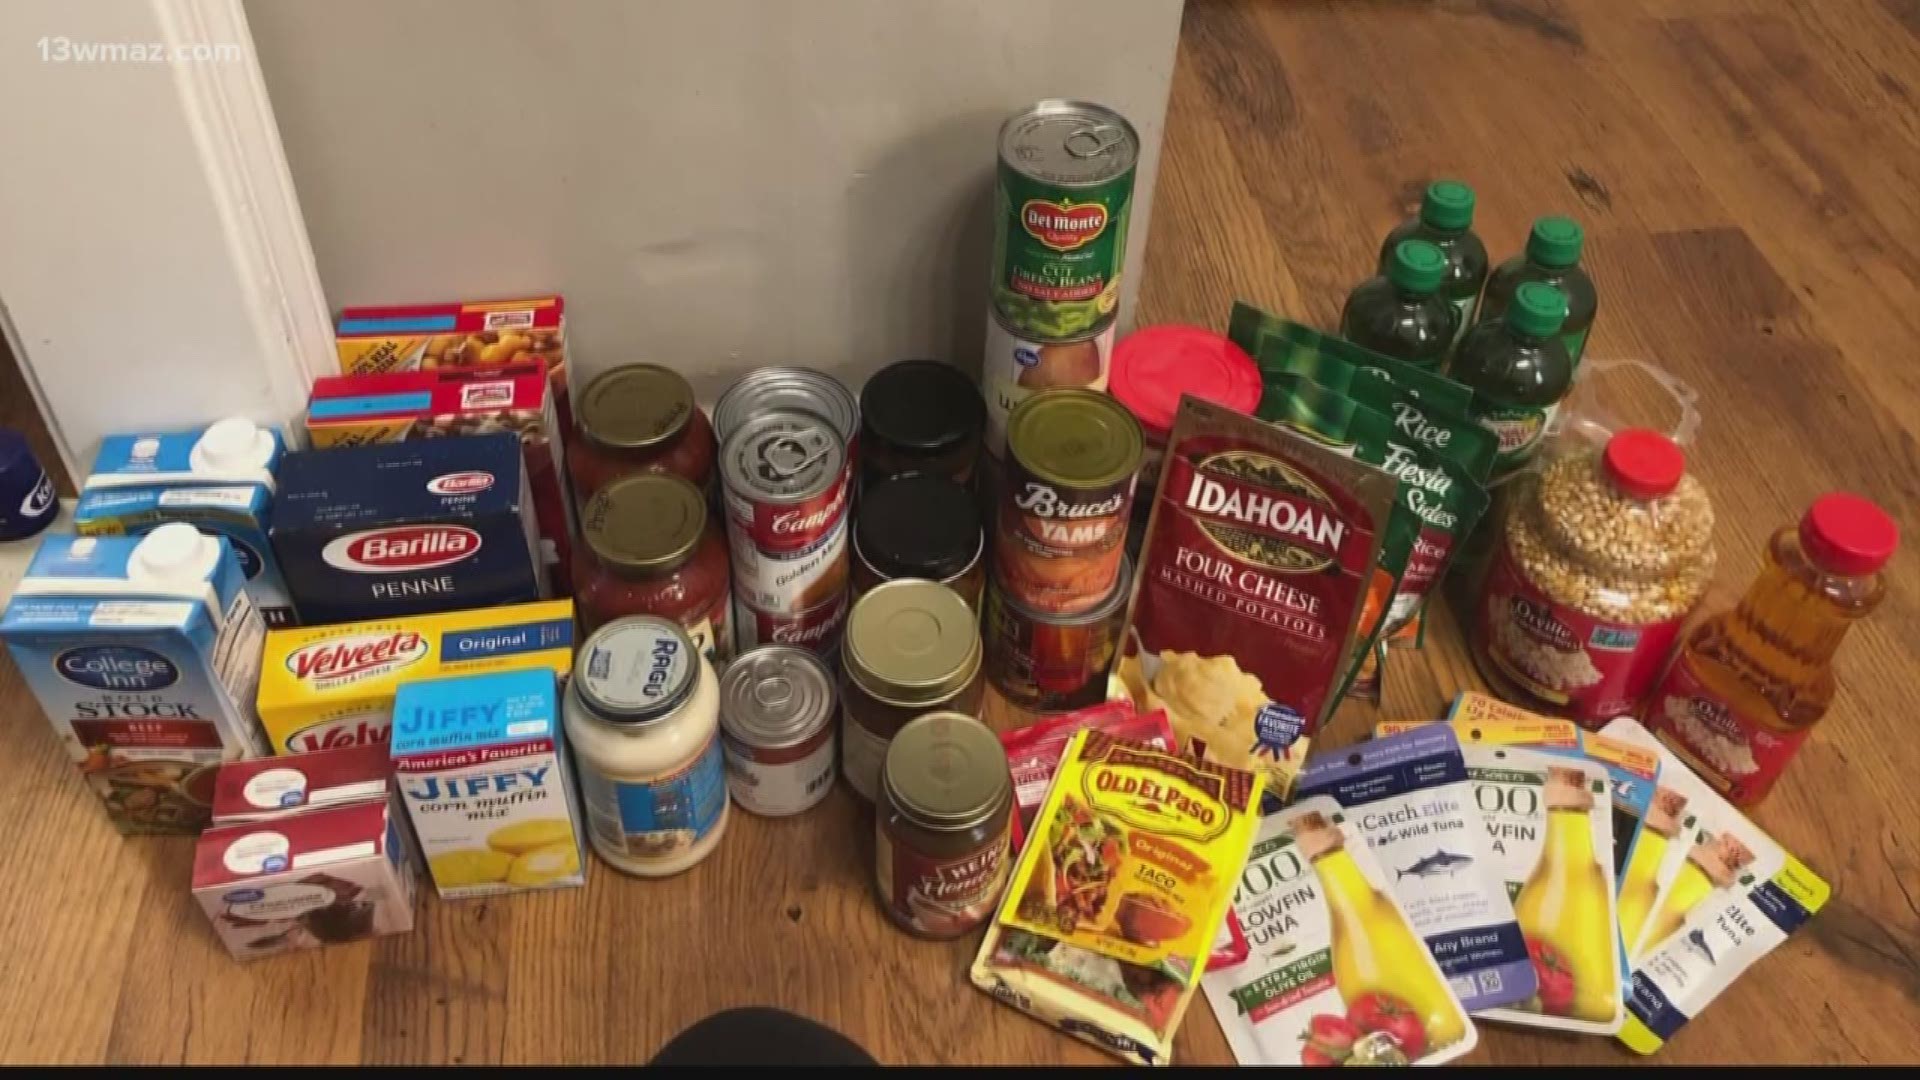 While doing some spring cleaning, Holly Beard's daughter asked if they could give some of their food to someone in need.